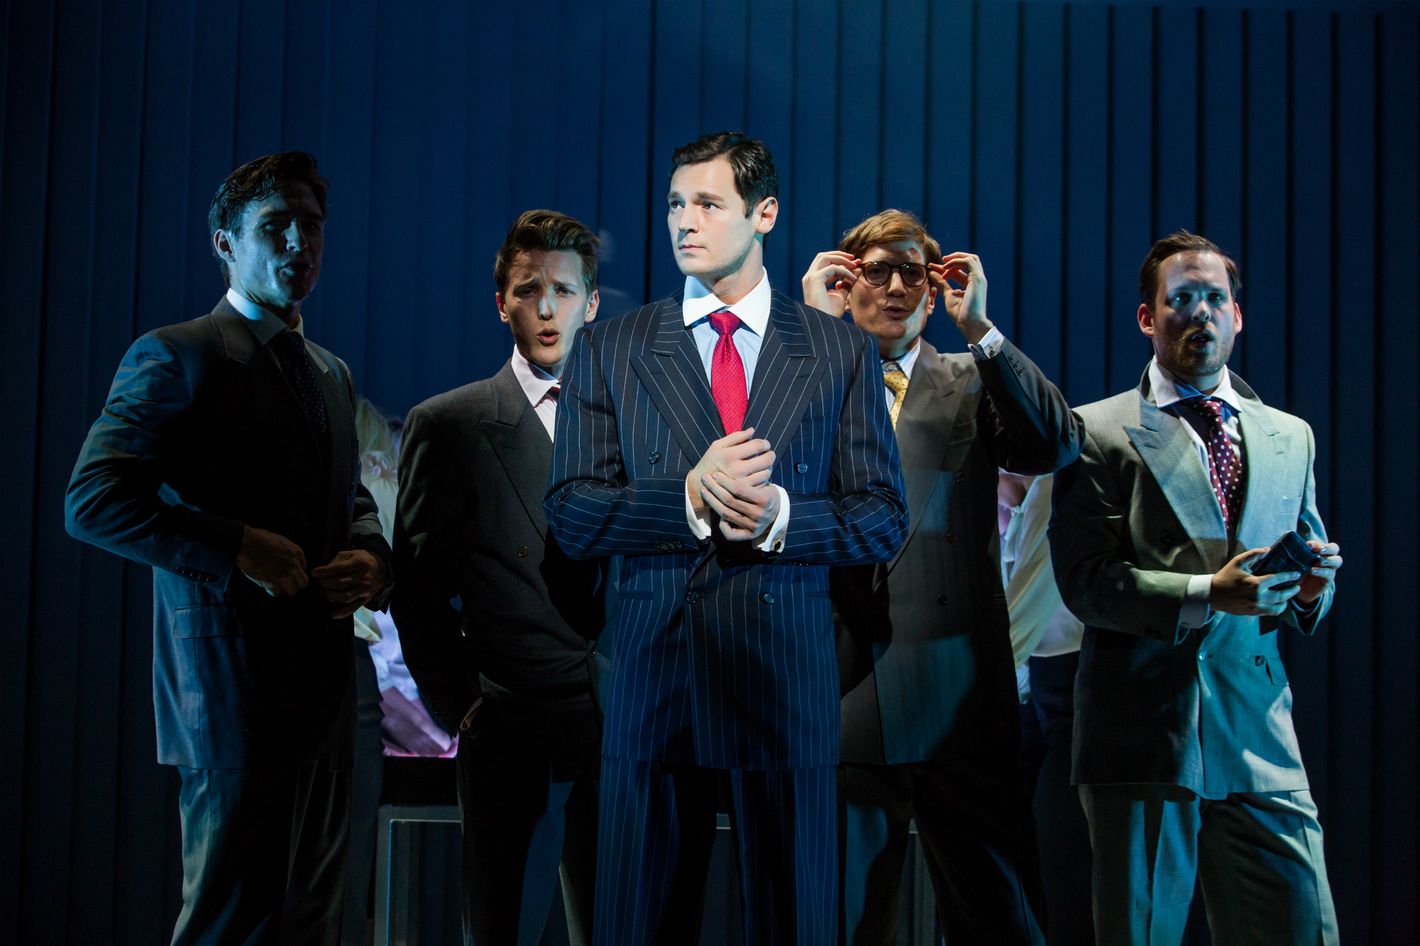 Review: 'American Psycho' now a bloody but good SF musical